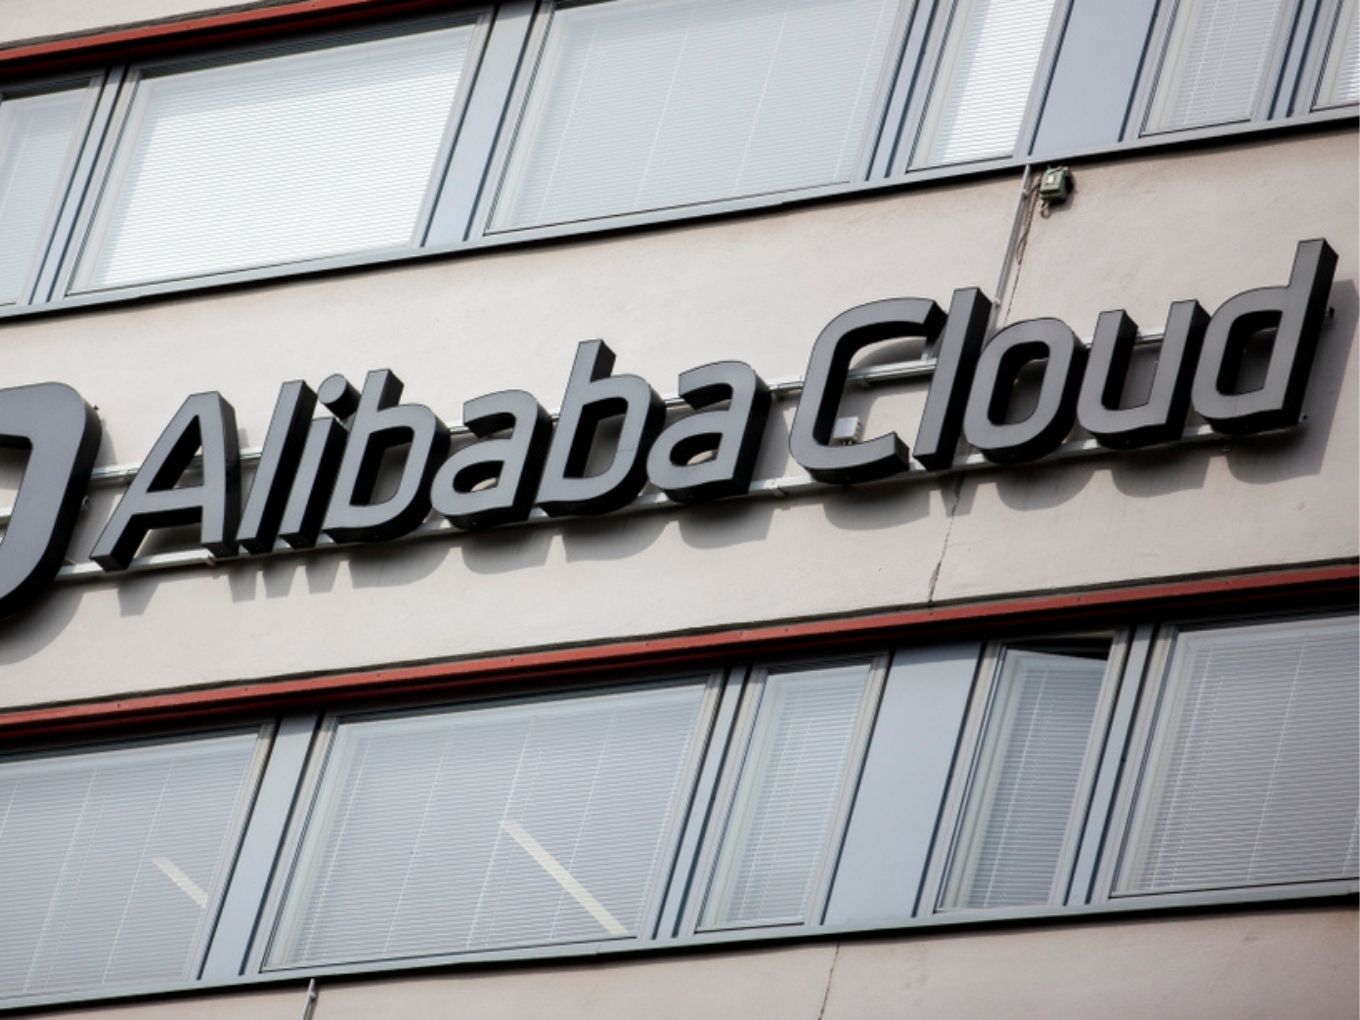 72 Alibaba Cloud Data Servers “Stealing” Indian Users Data: Intelligence Sources